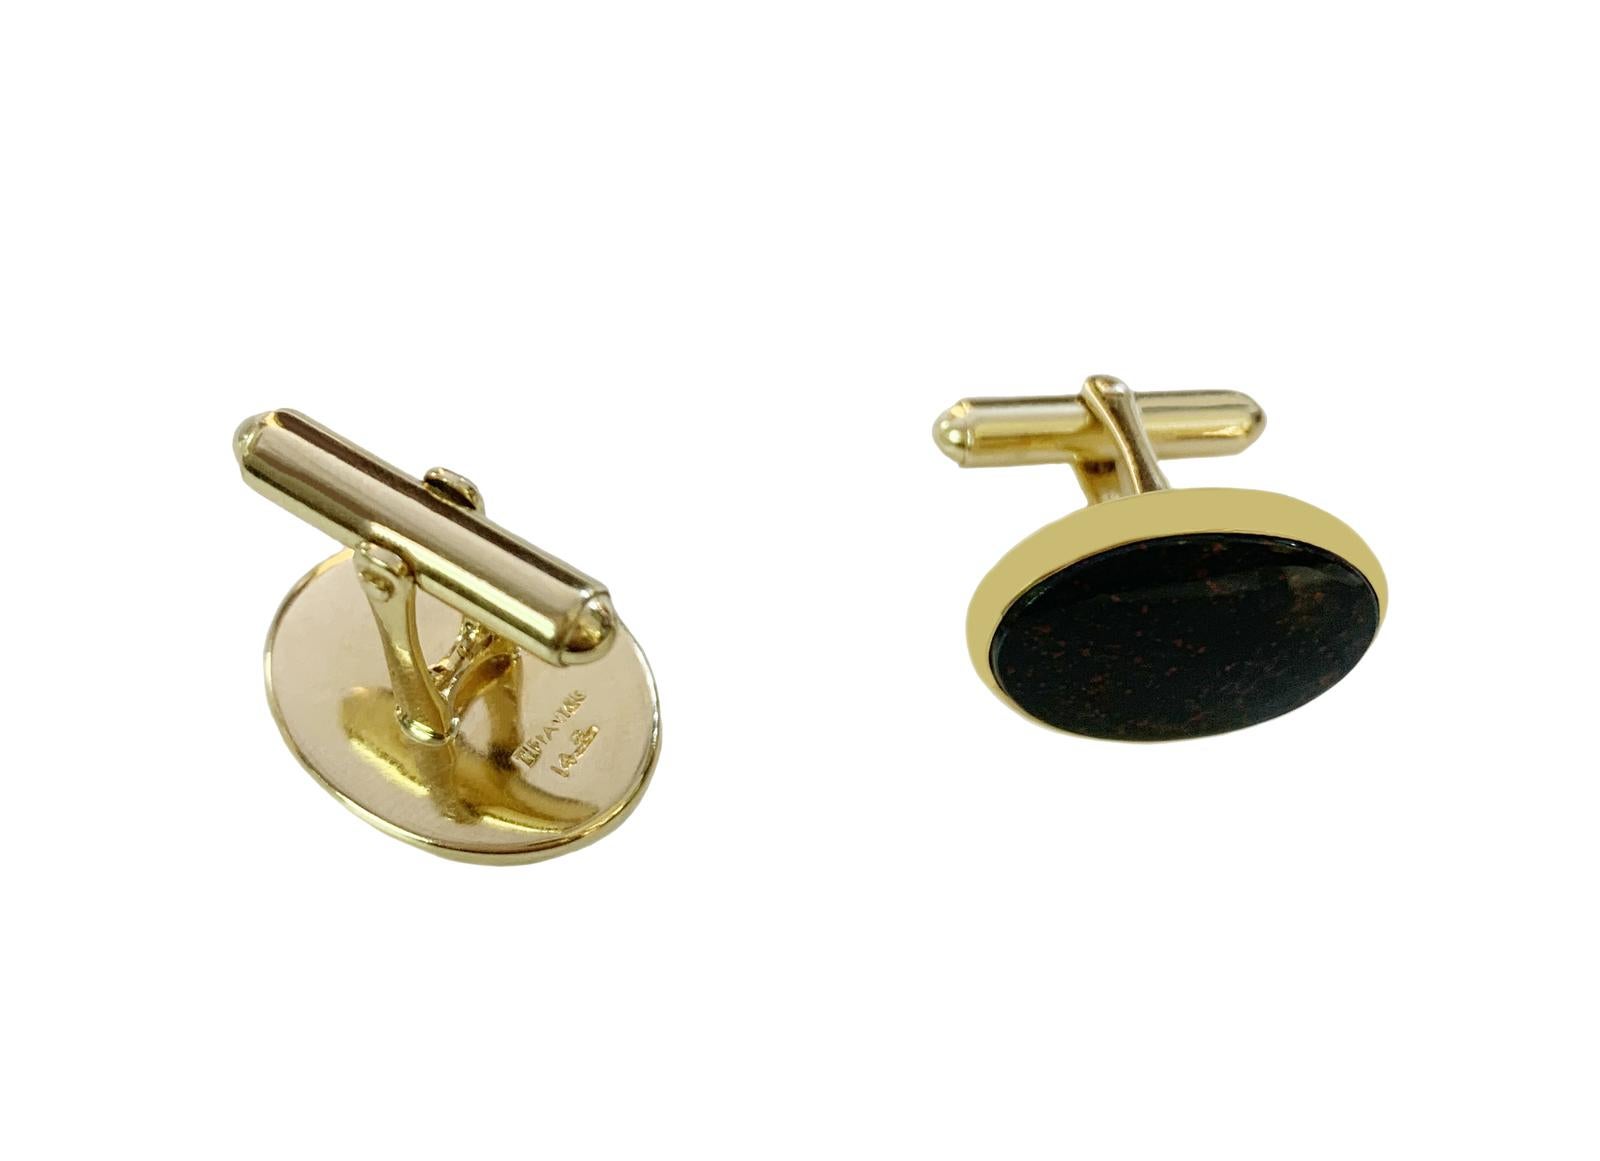 Tiffany & Co. Heliotrope 'Bloodstone' 14k Gold Cufflinks In Excellent Condition For Sale In New York, NY